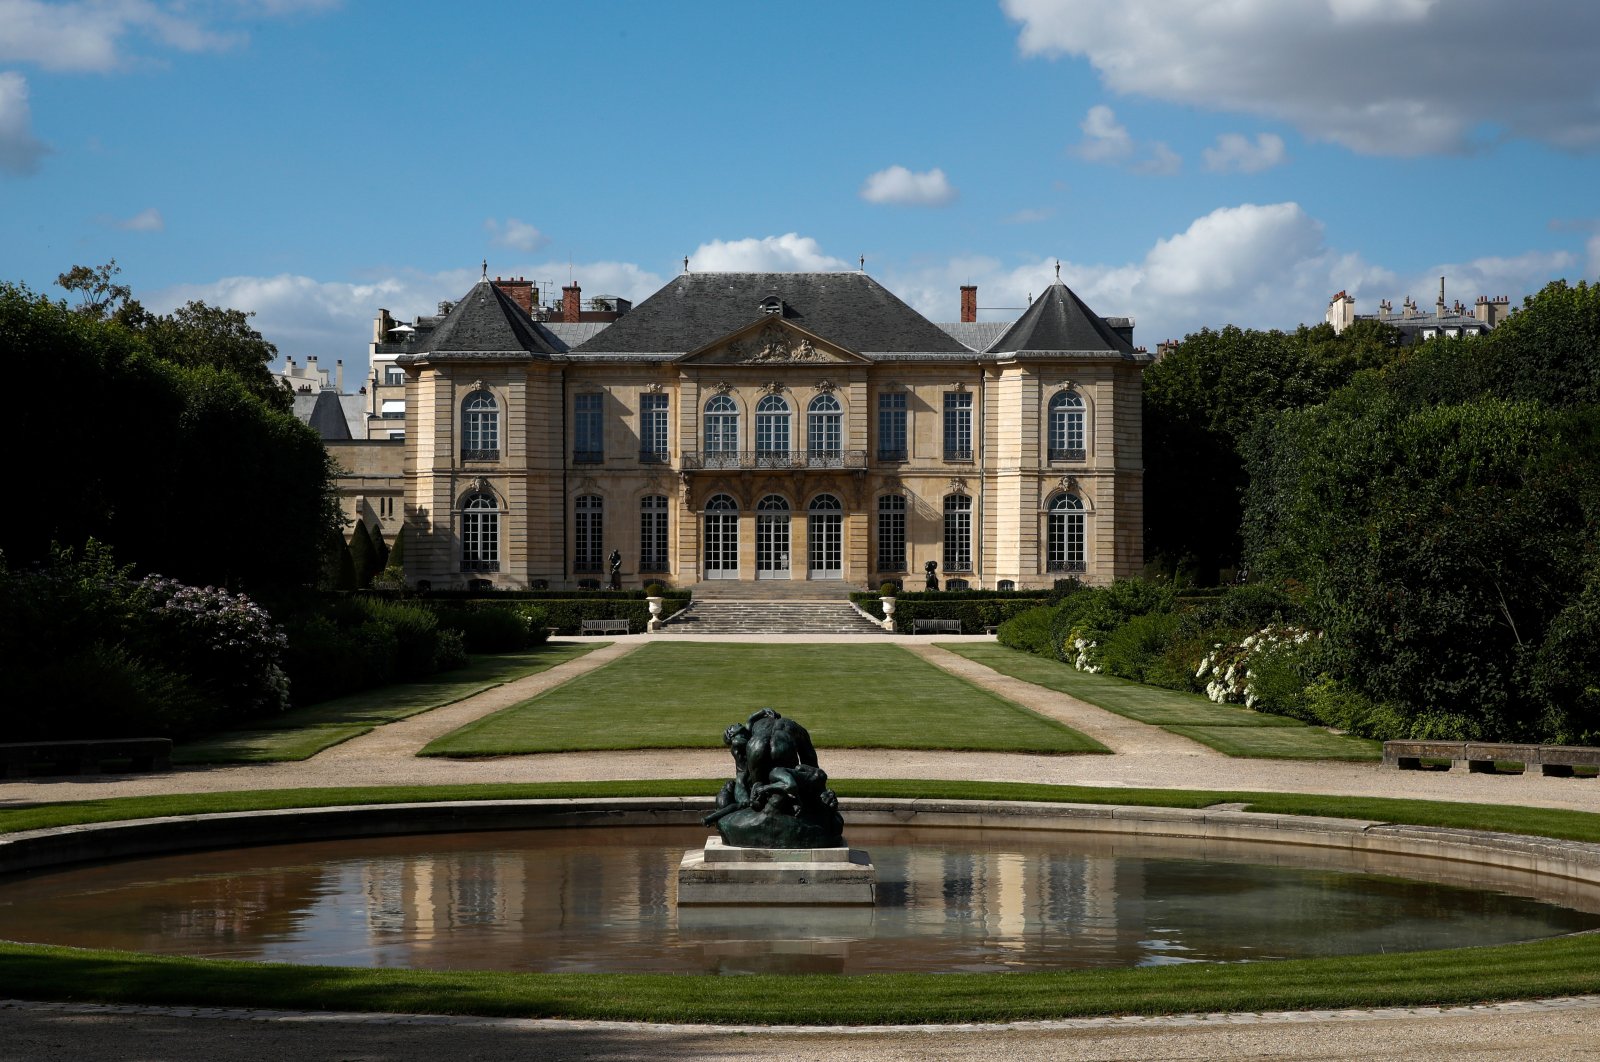 A view shows the Rodin Museum on the eve of its reopening after an almost four-month closure due to the coronavirus outbreak, in Paris, France, July 6, 2020. (Reuters)